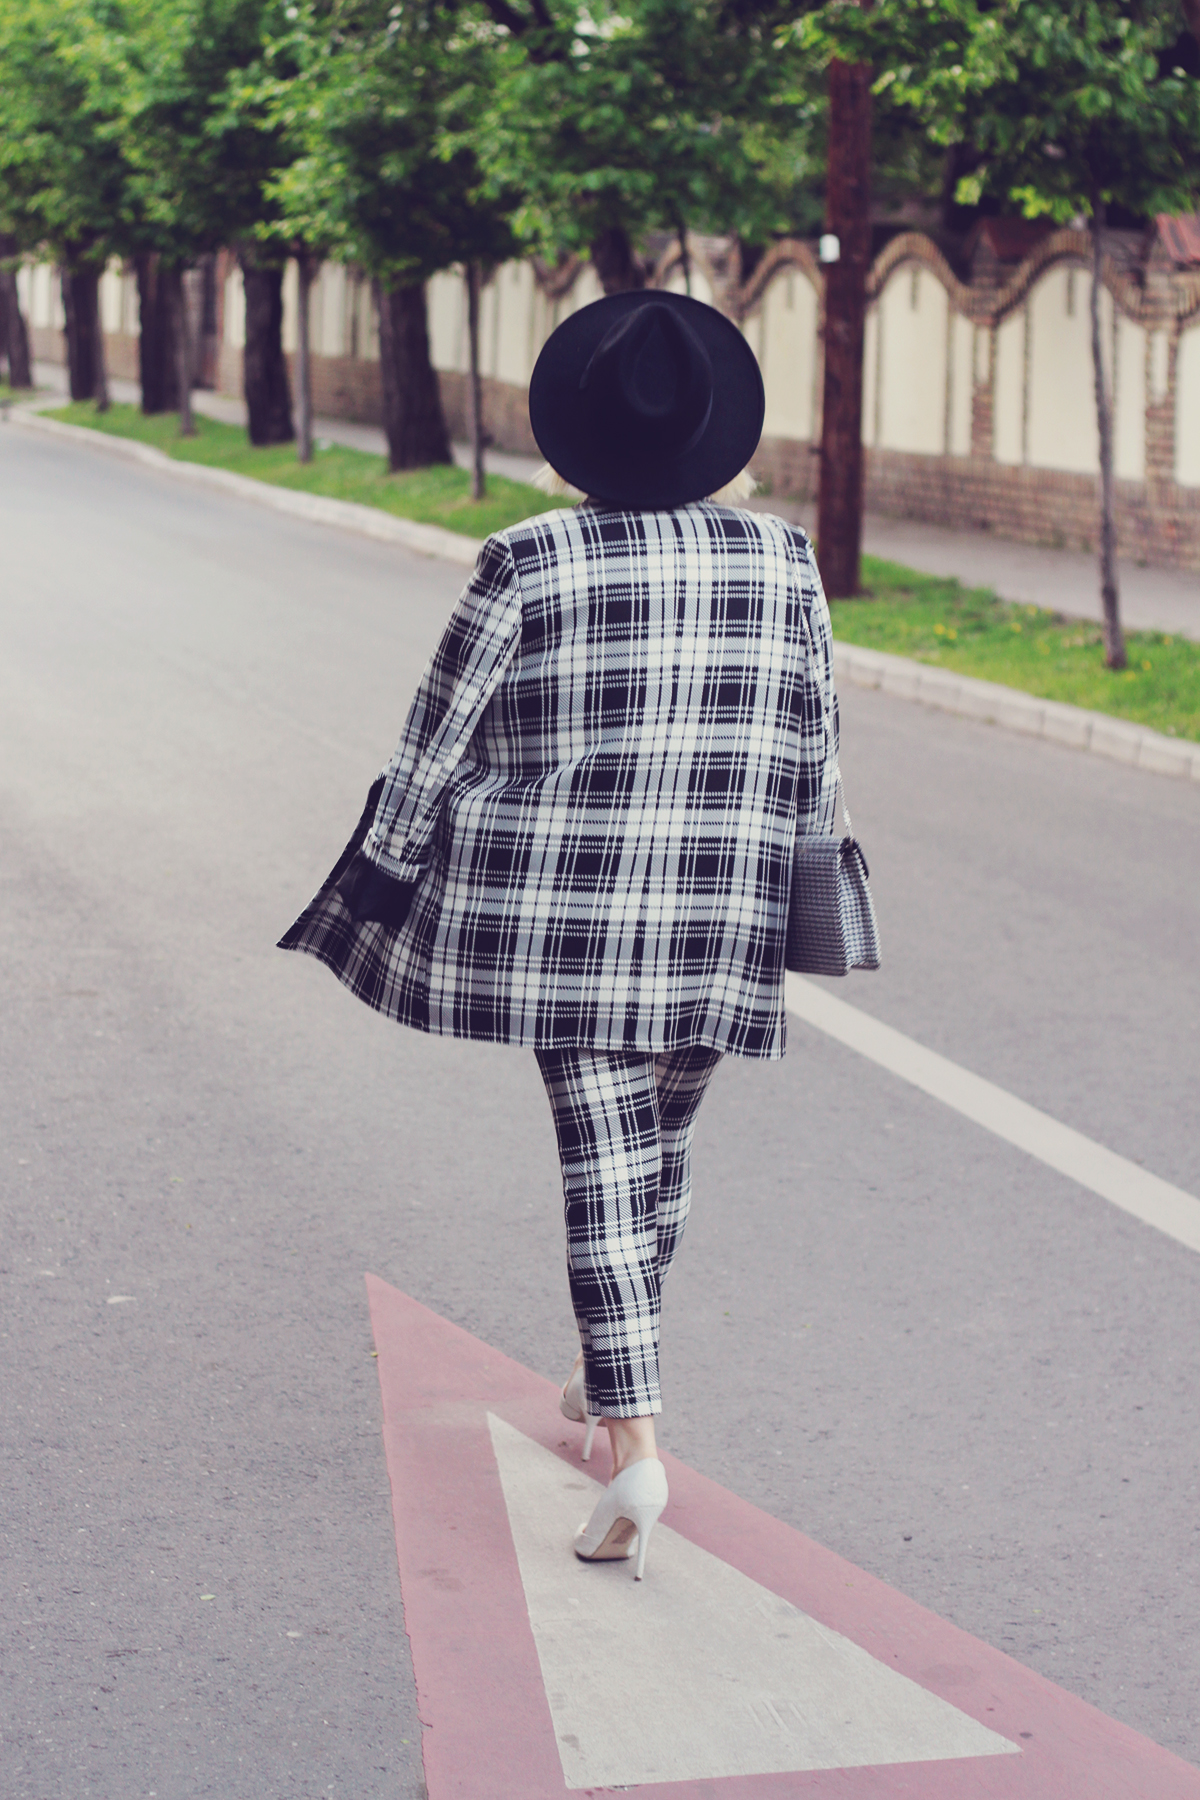 black and white look, office look, Womanfashion.ro checked suit, fedora hat, white heels, houndstooth Dune London bag, spring, spring fashion